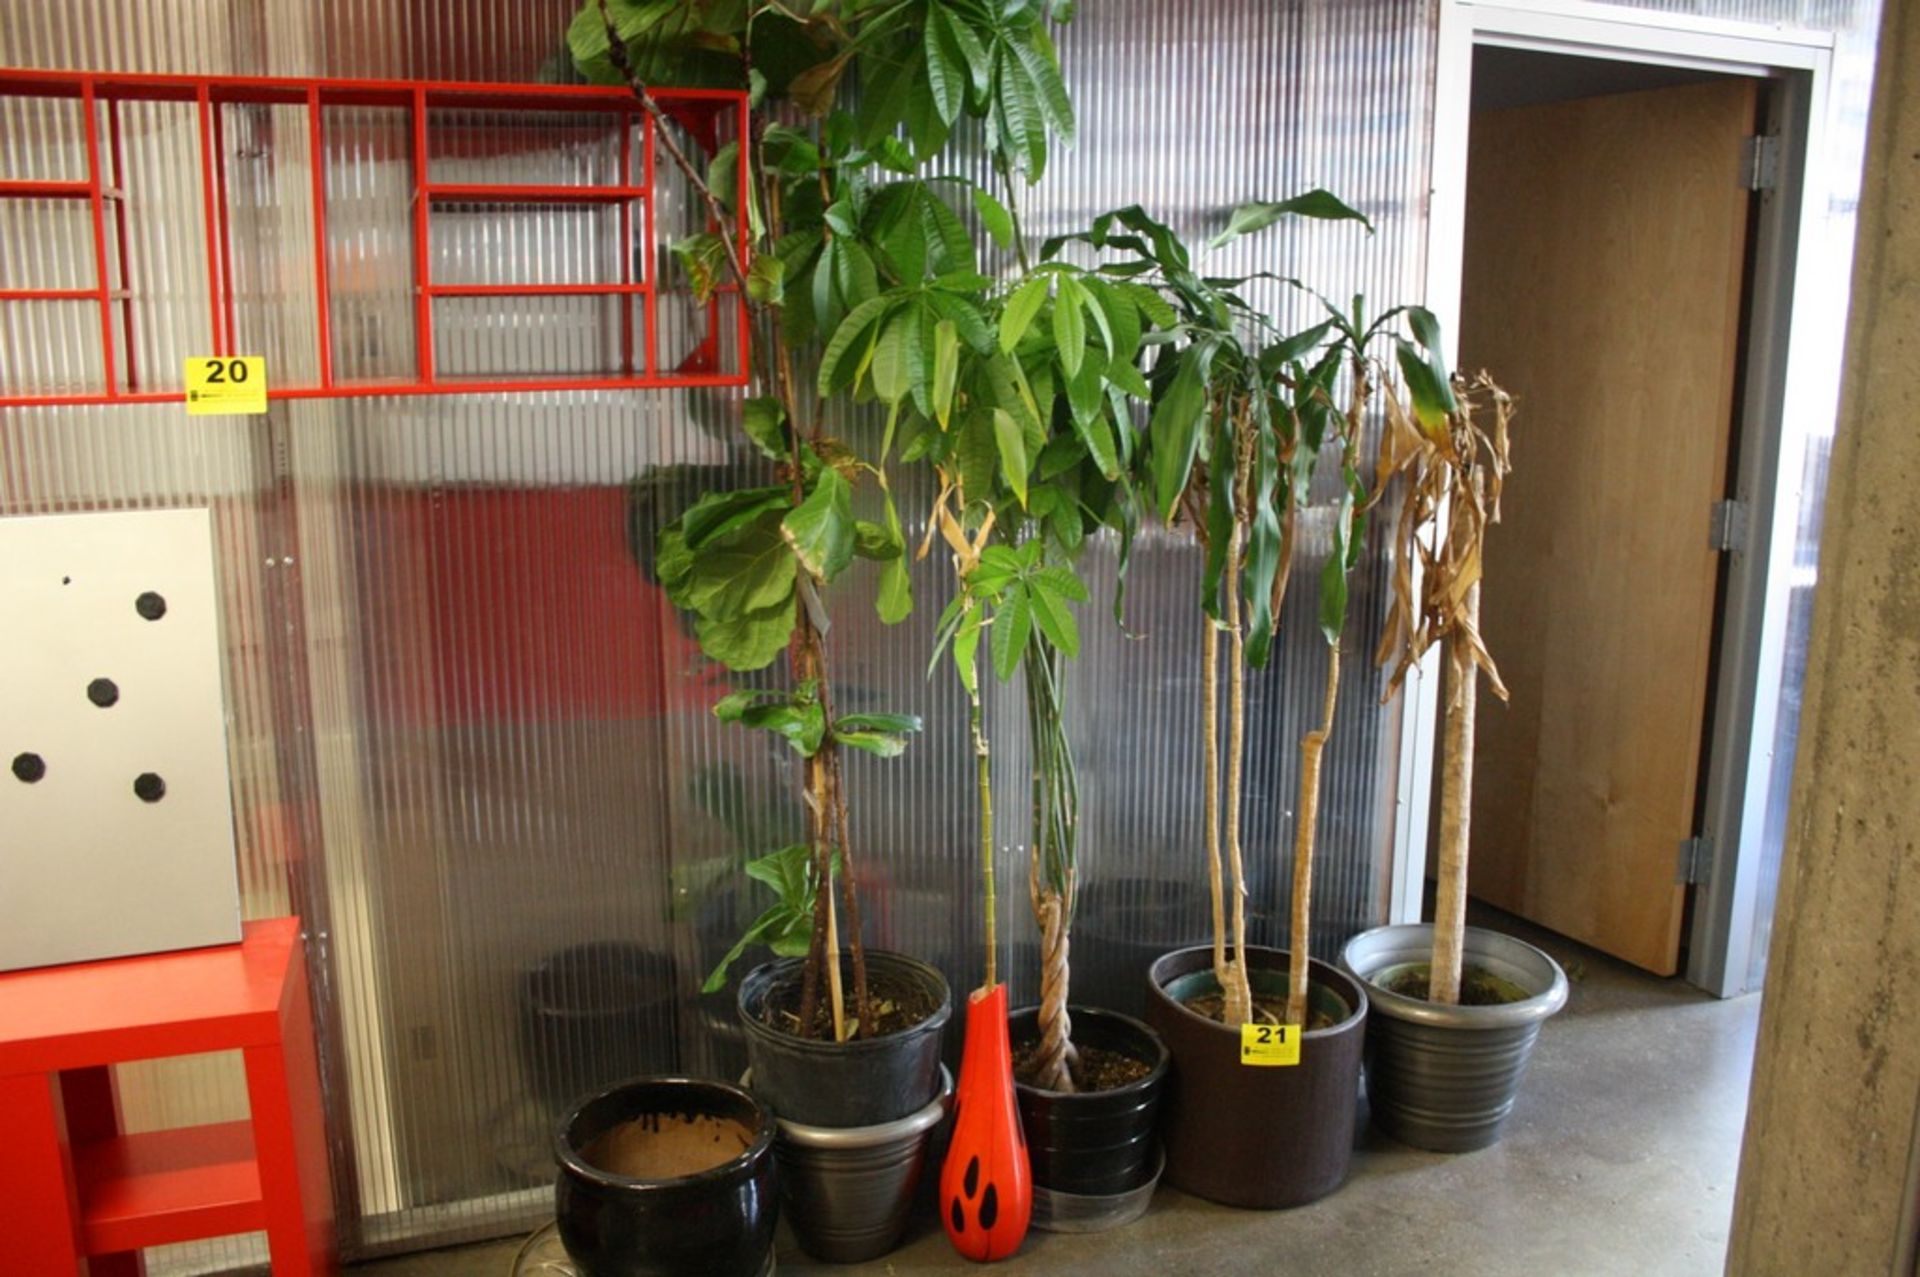 ASSORTED LIVE PLANTS LOCATED THROUGHOUT FACILTY